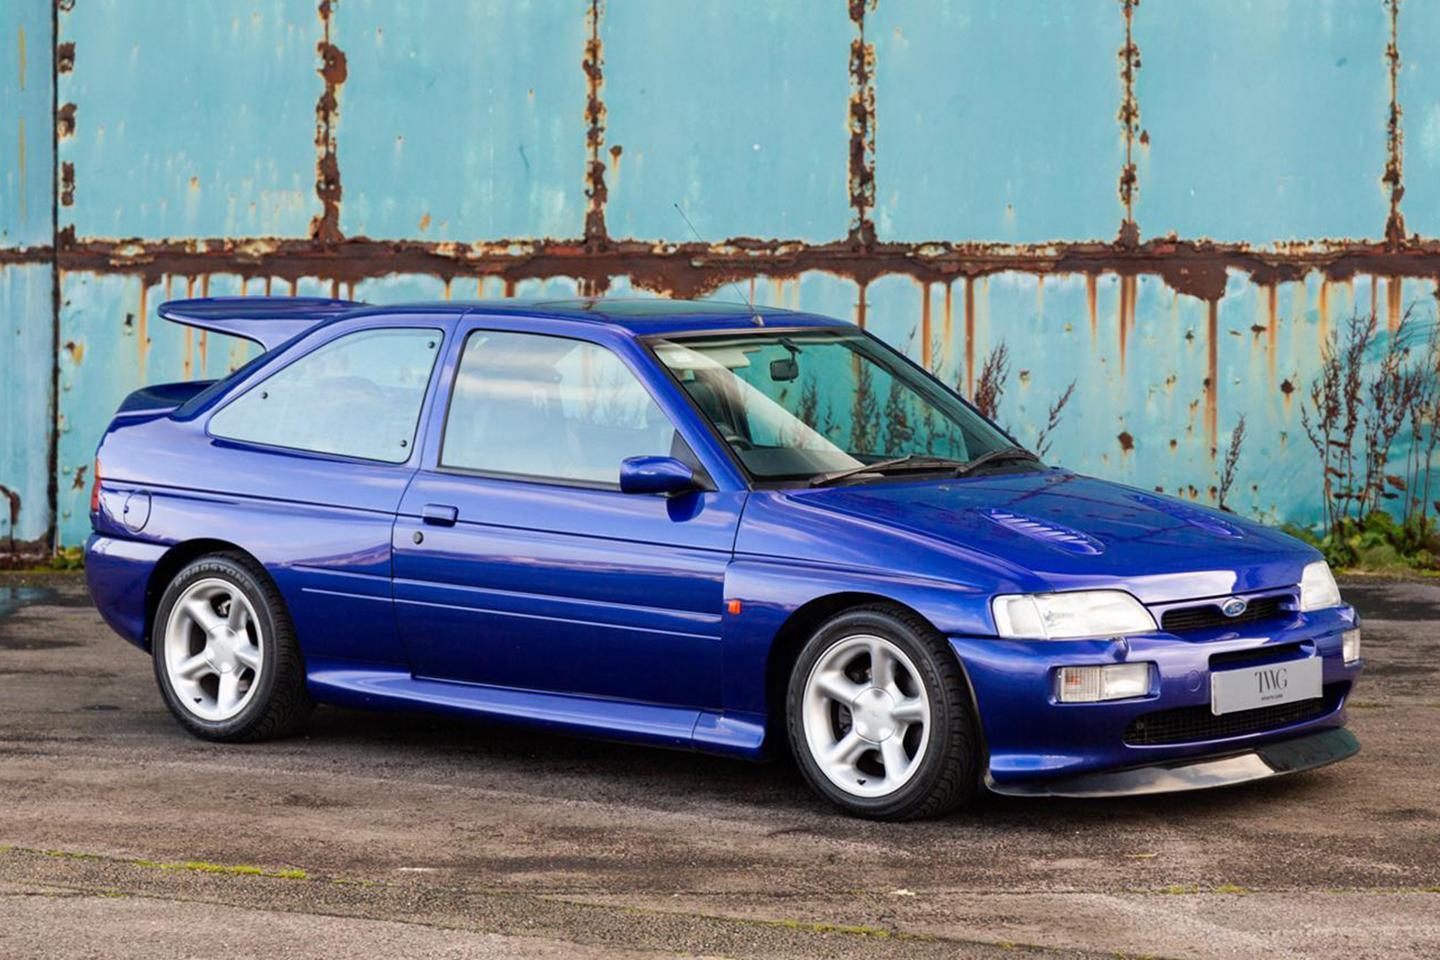 Ford Sierra Sapphire Cosworth Saloon Tailored Indoor Car Cover 1987 to 1993